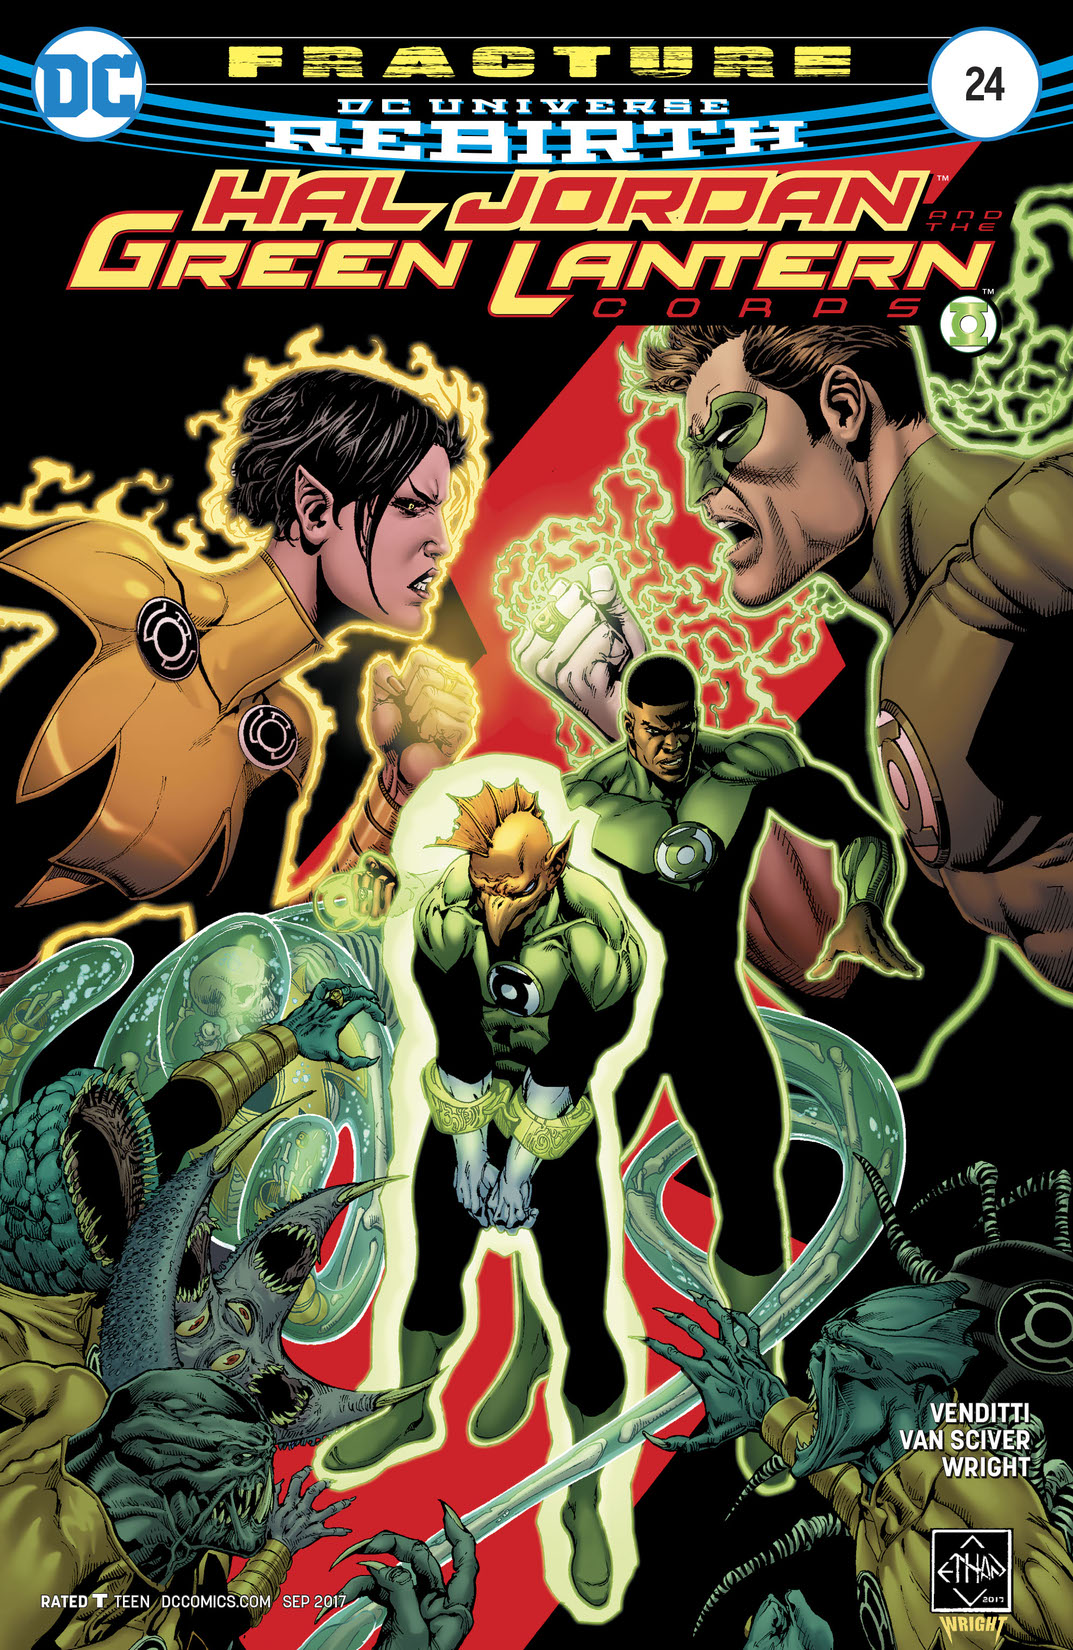 Hal Jordan and The Green Lantern Corps #24 preview images